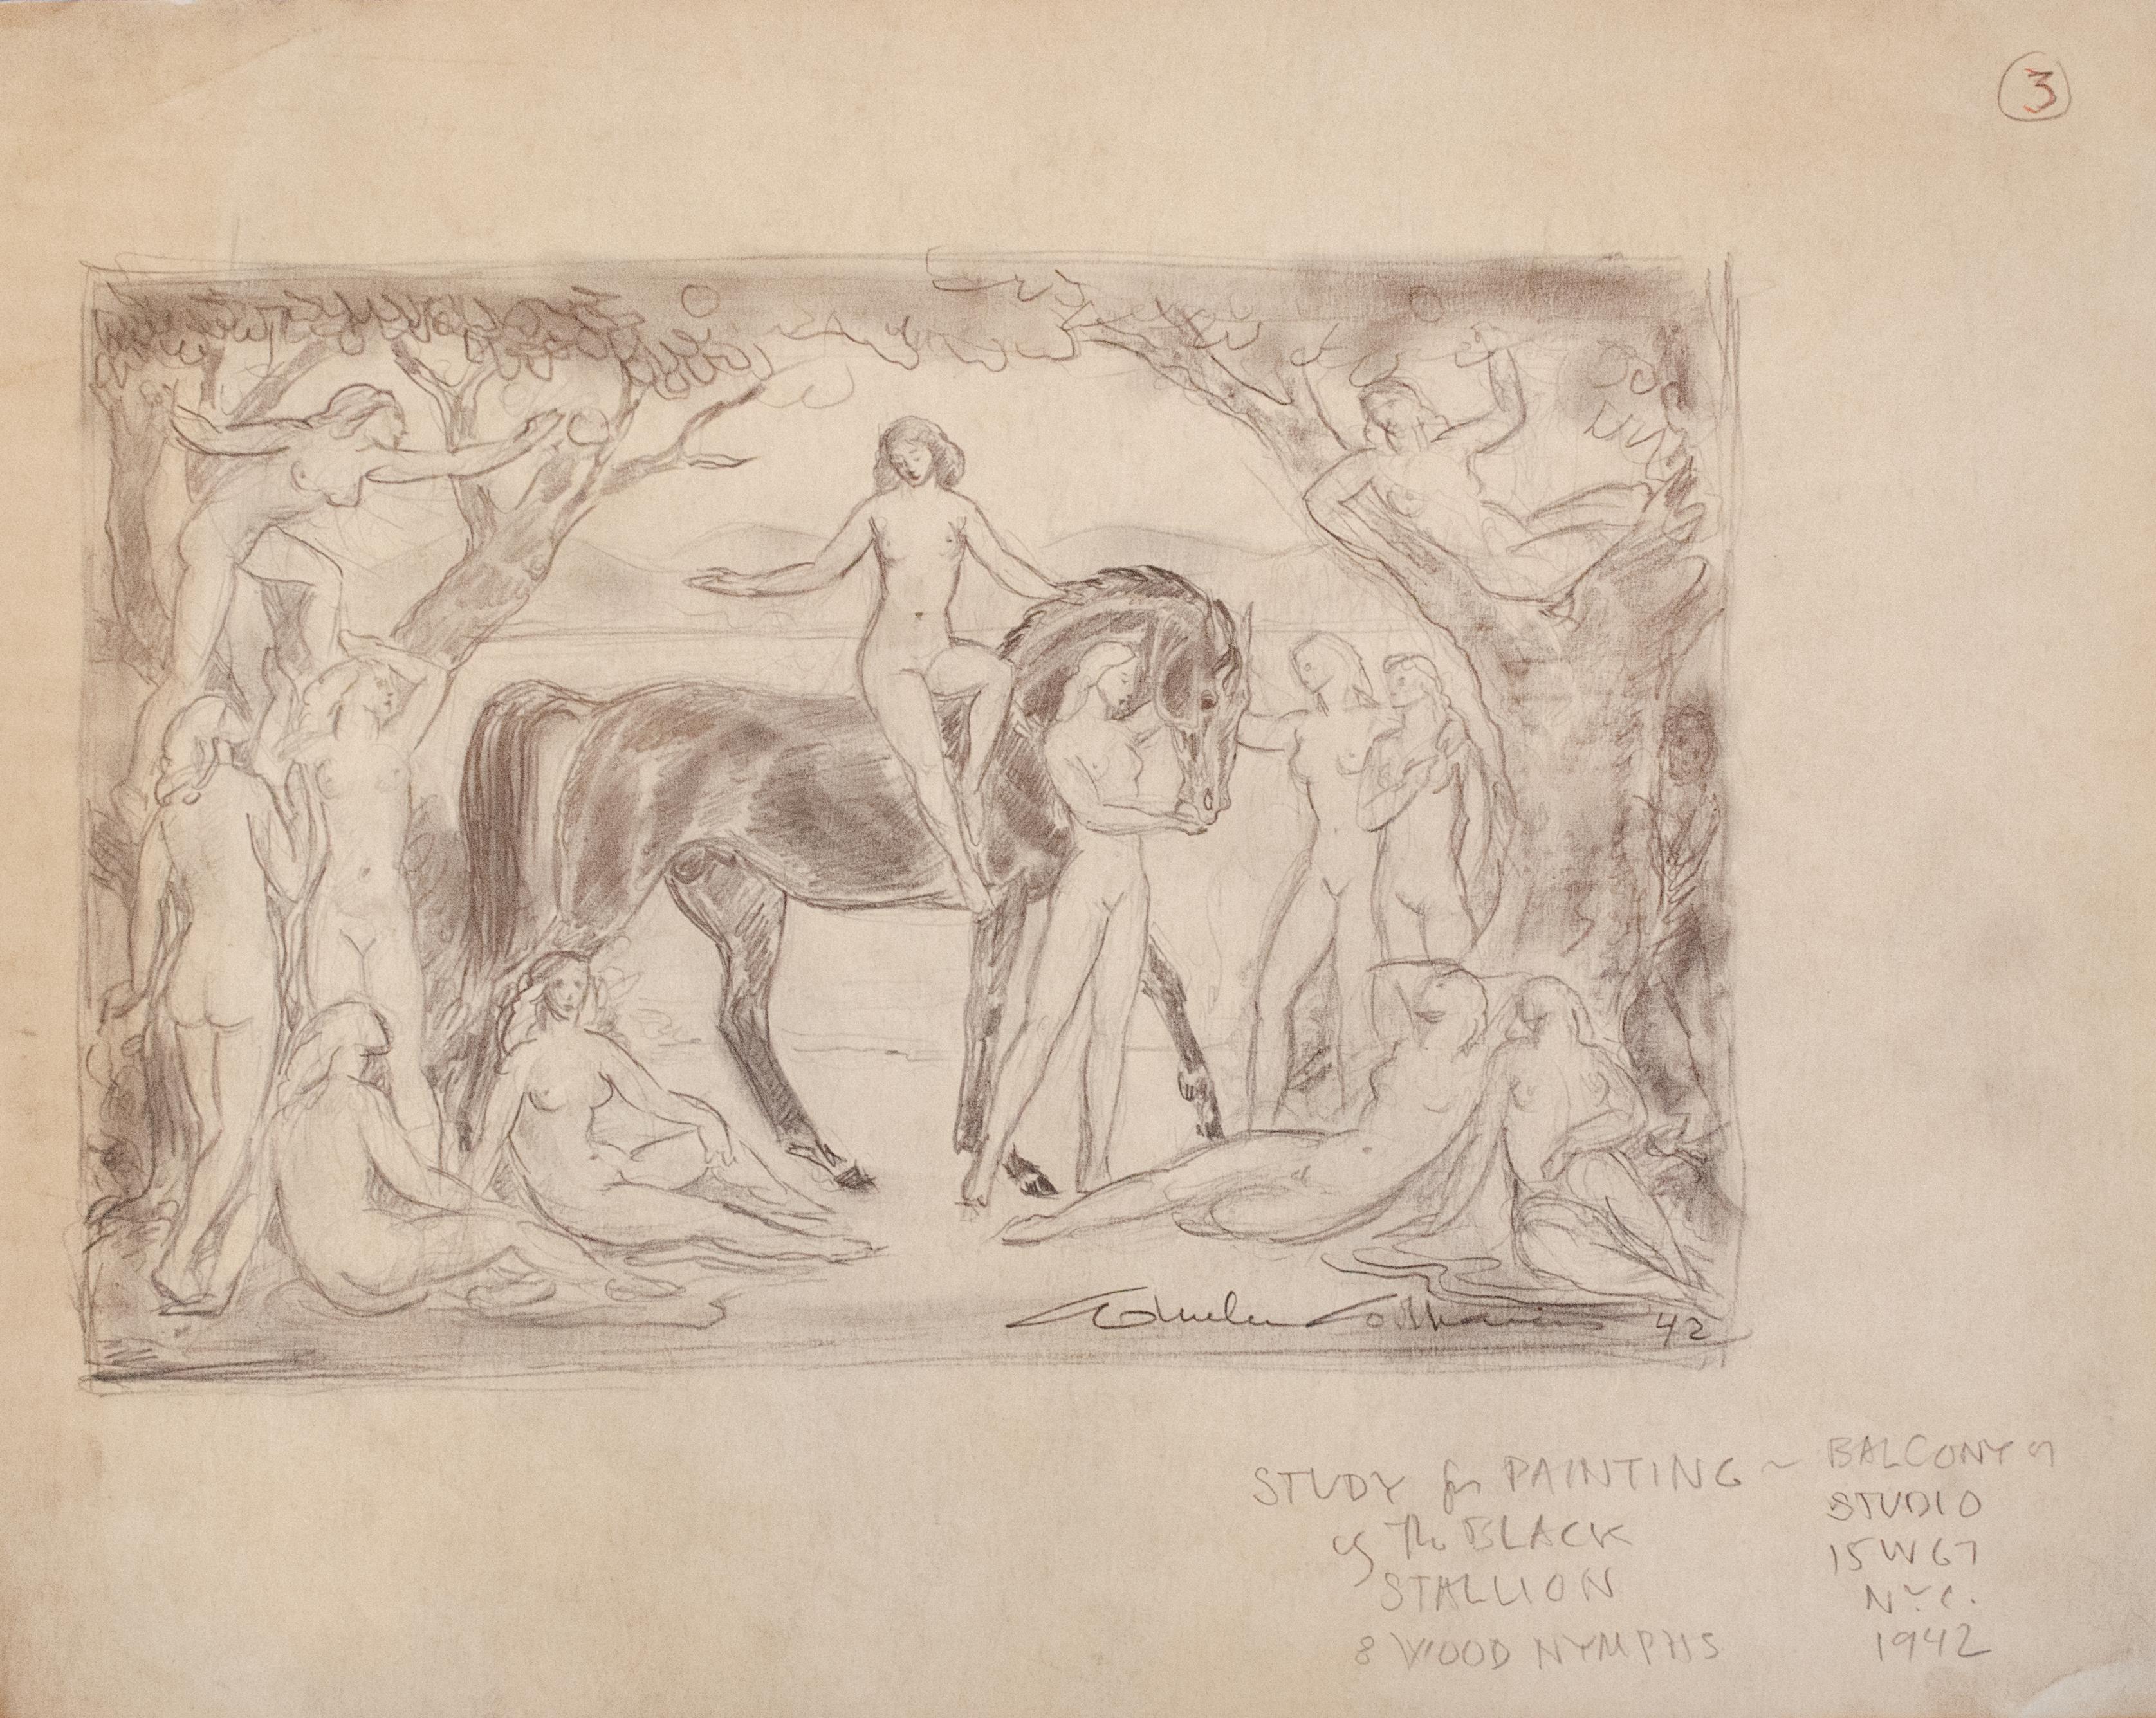 Wheeler Williams (American, 1897-1972)
Untitled Study, 1942
Pencil on paper
9 1/4 x 12 1/4 in. 
Signed lower right recto: Wheeler Williams, 1942
Inscribed recto: Study for painting of the black stallion and wood nymphs, balcony on studio 15 @ 67th,